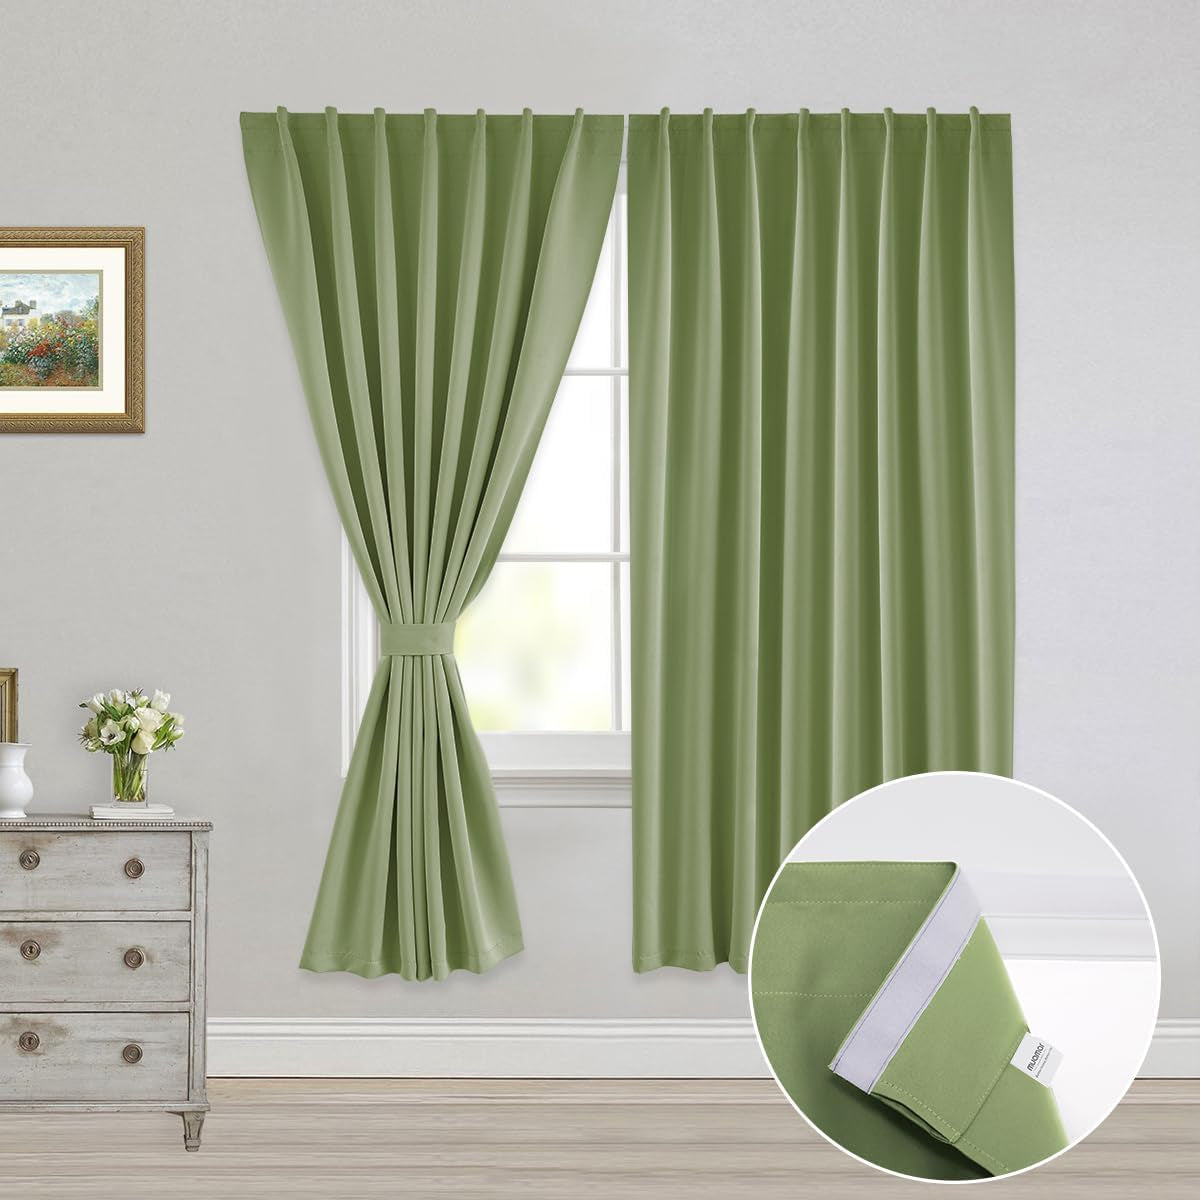 Muamar 2Pcs Blackout Curtains Privacy Curtains 63 Inch Length Window Curtains,Easy Install Thermal Insulated Window Shades,Stick Curtains No Rods, Black 42" W X 63" L  Muamar Sage Green 52"W X 63"L 